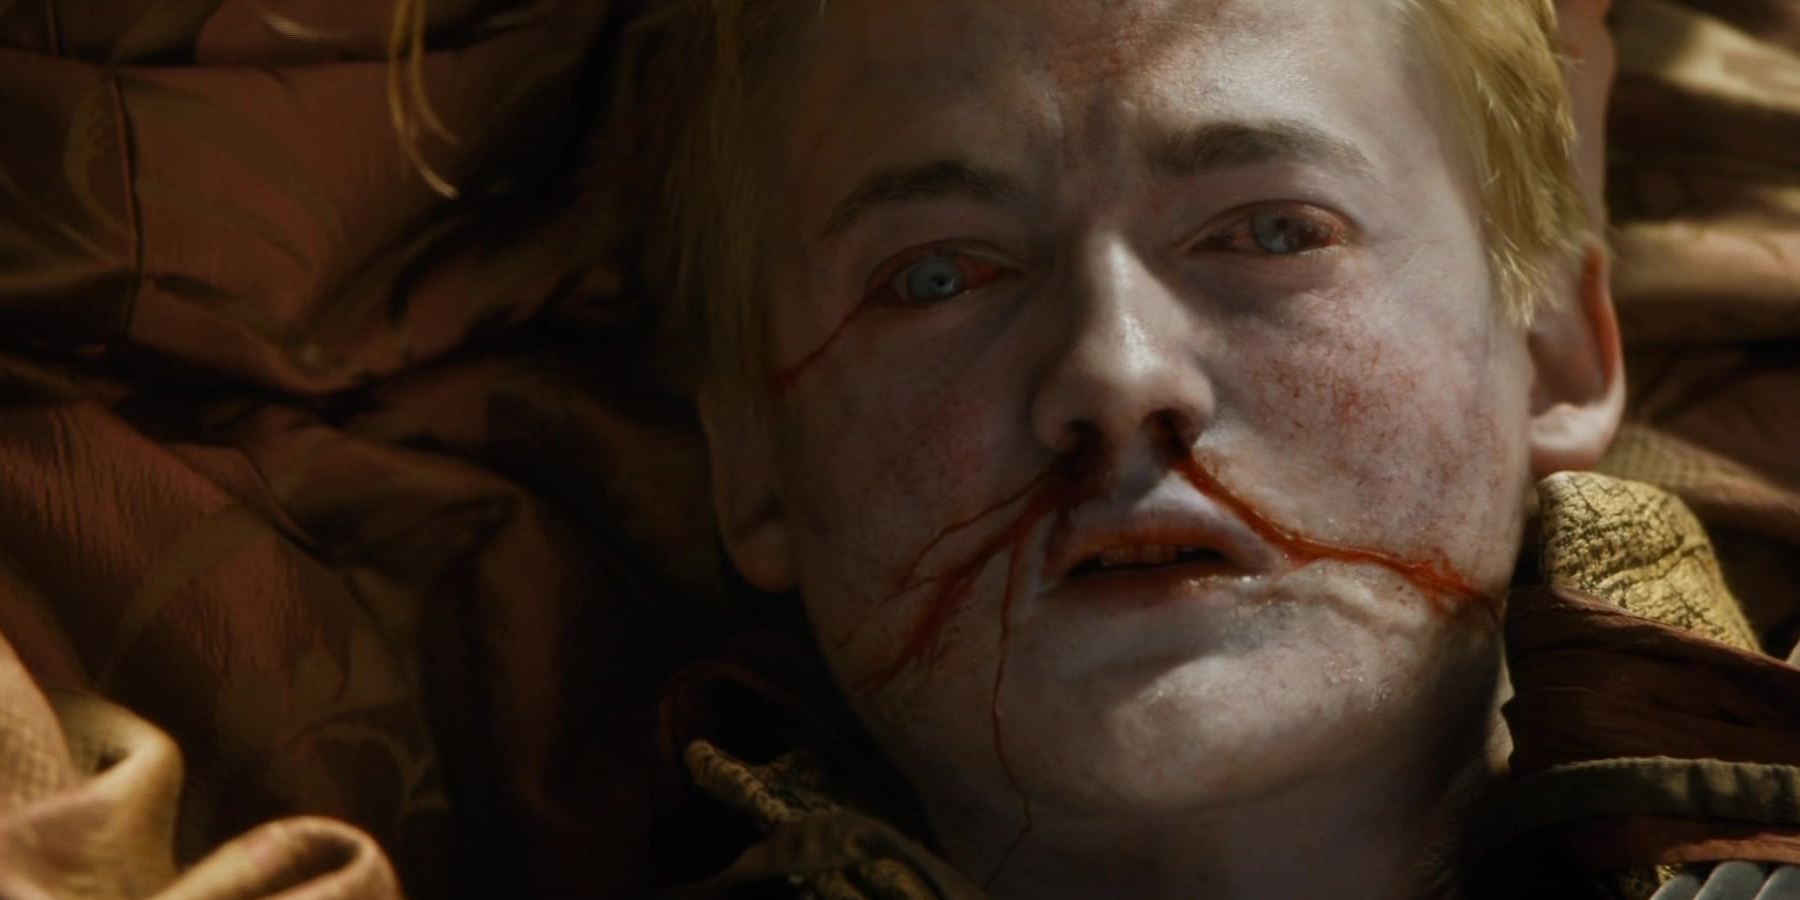 Joffrey bleeding from his nose and eyes in Game of Thrones